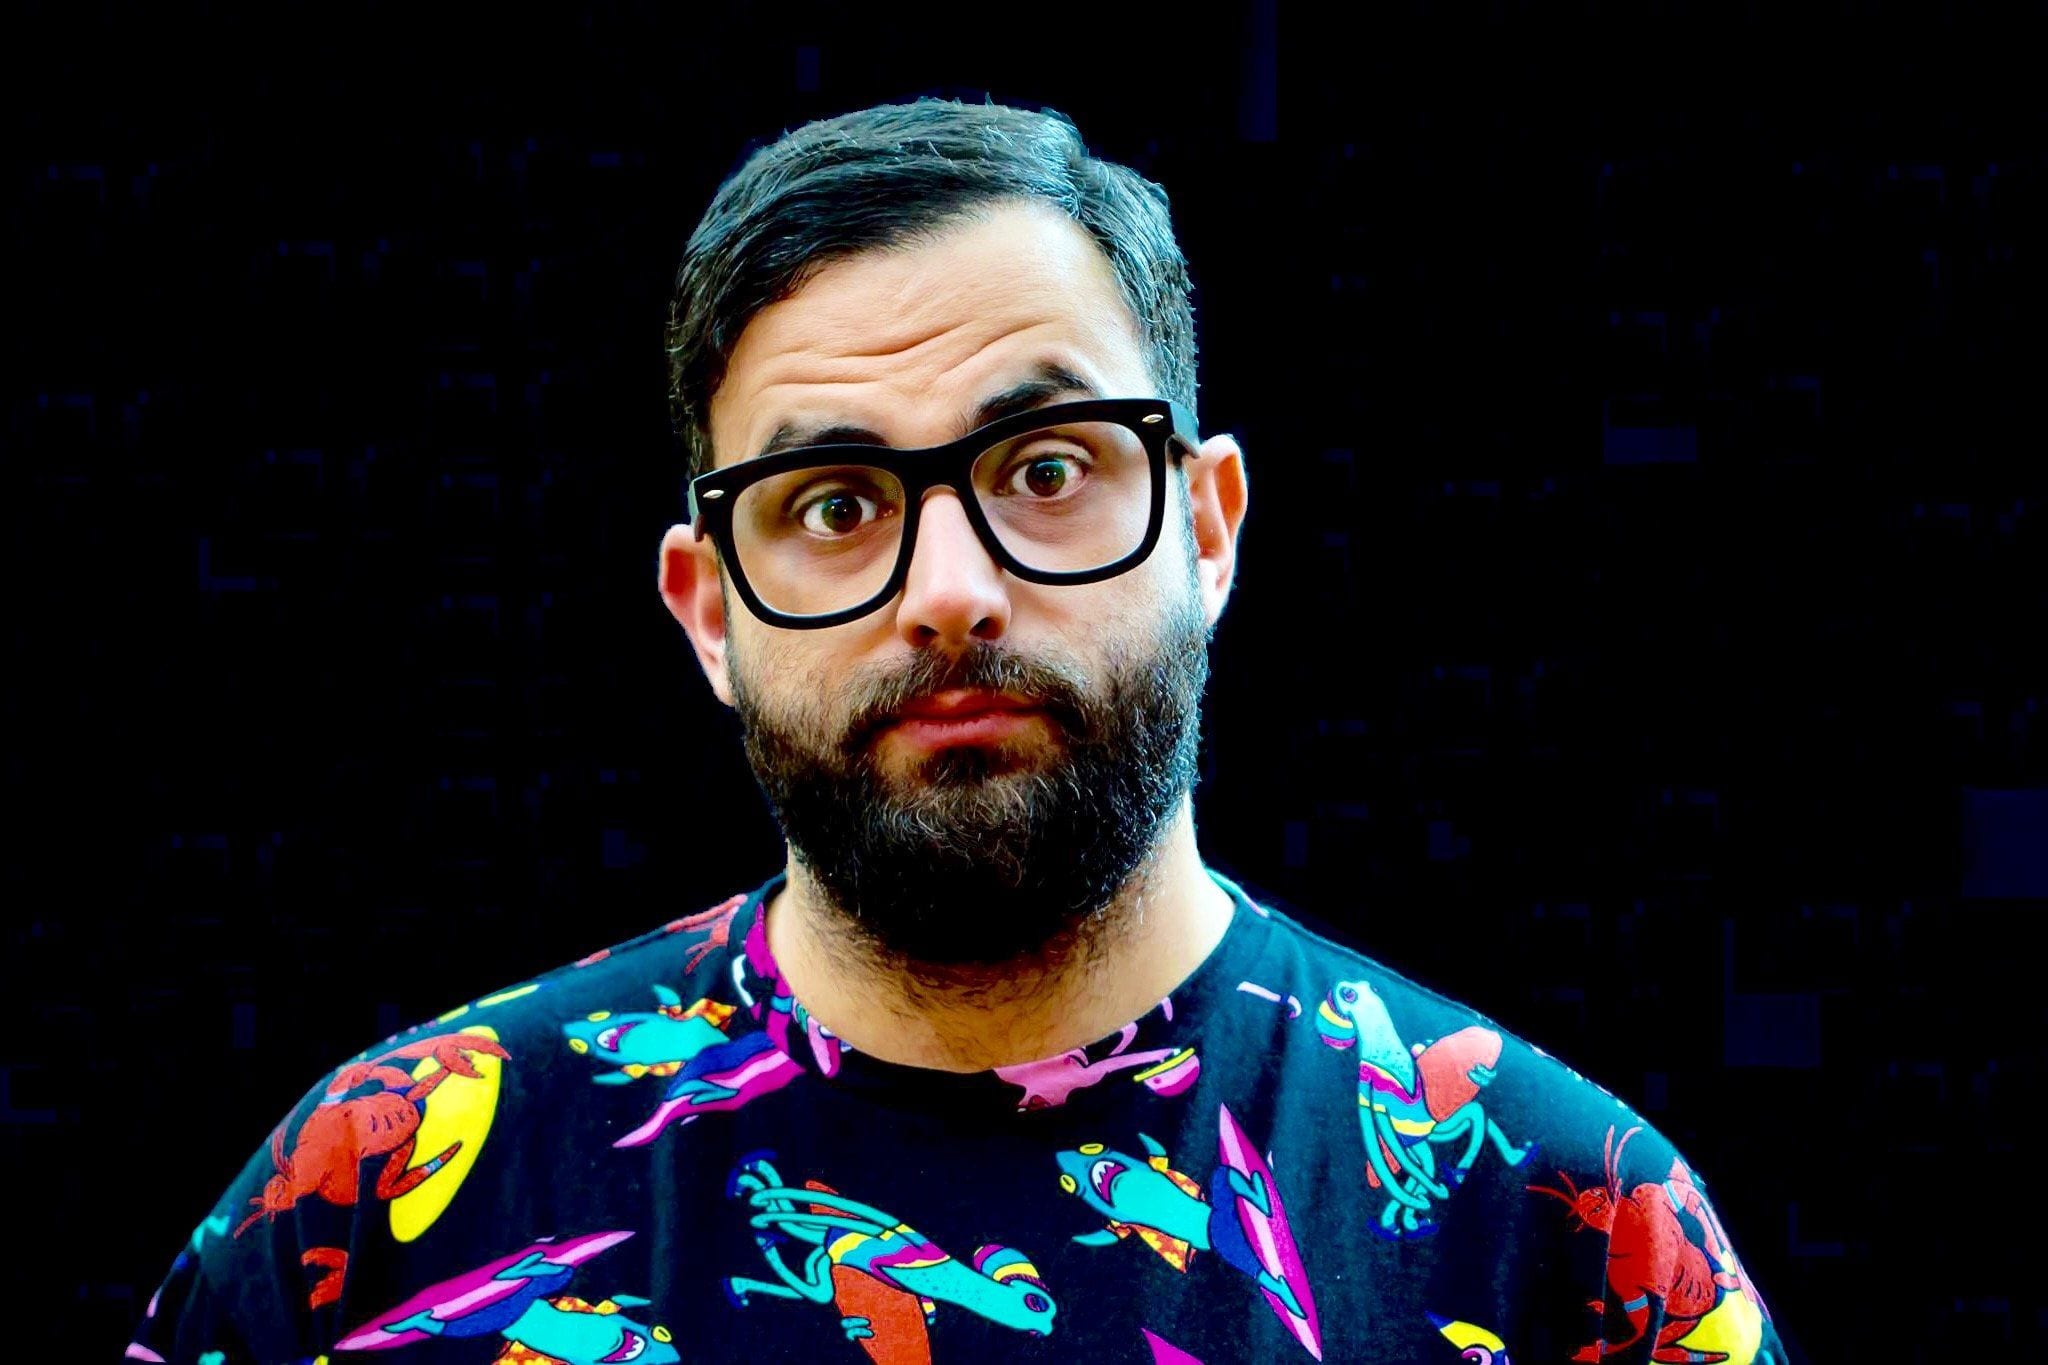 Mihalis Safras Debuts First Single “Lacid” from New EP (premiere)